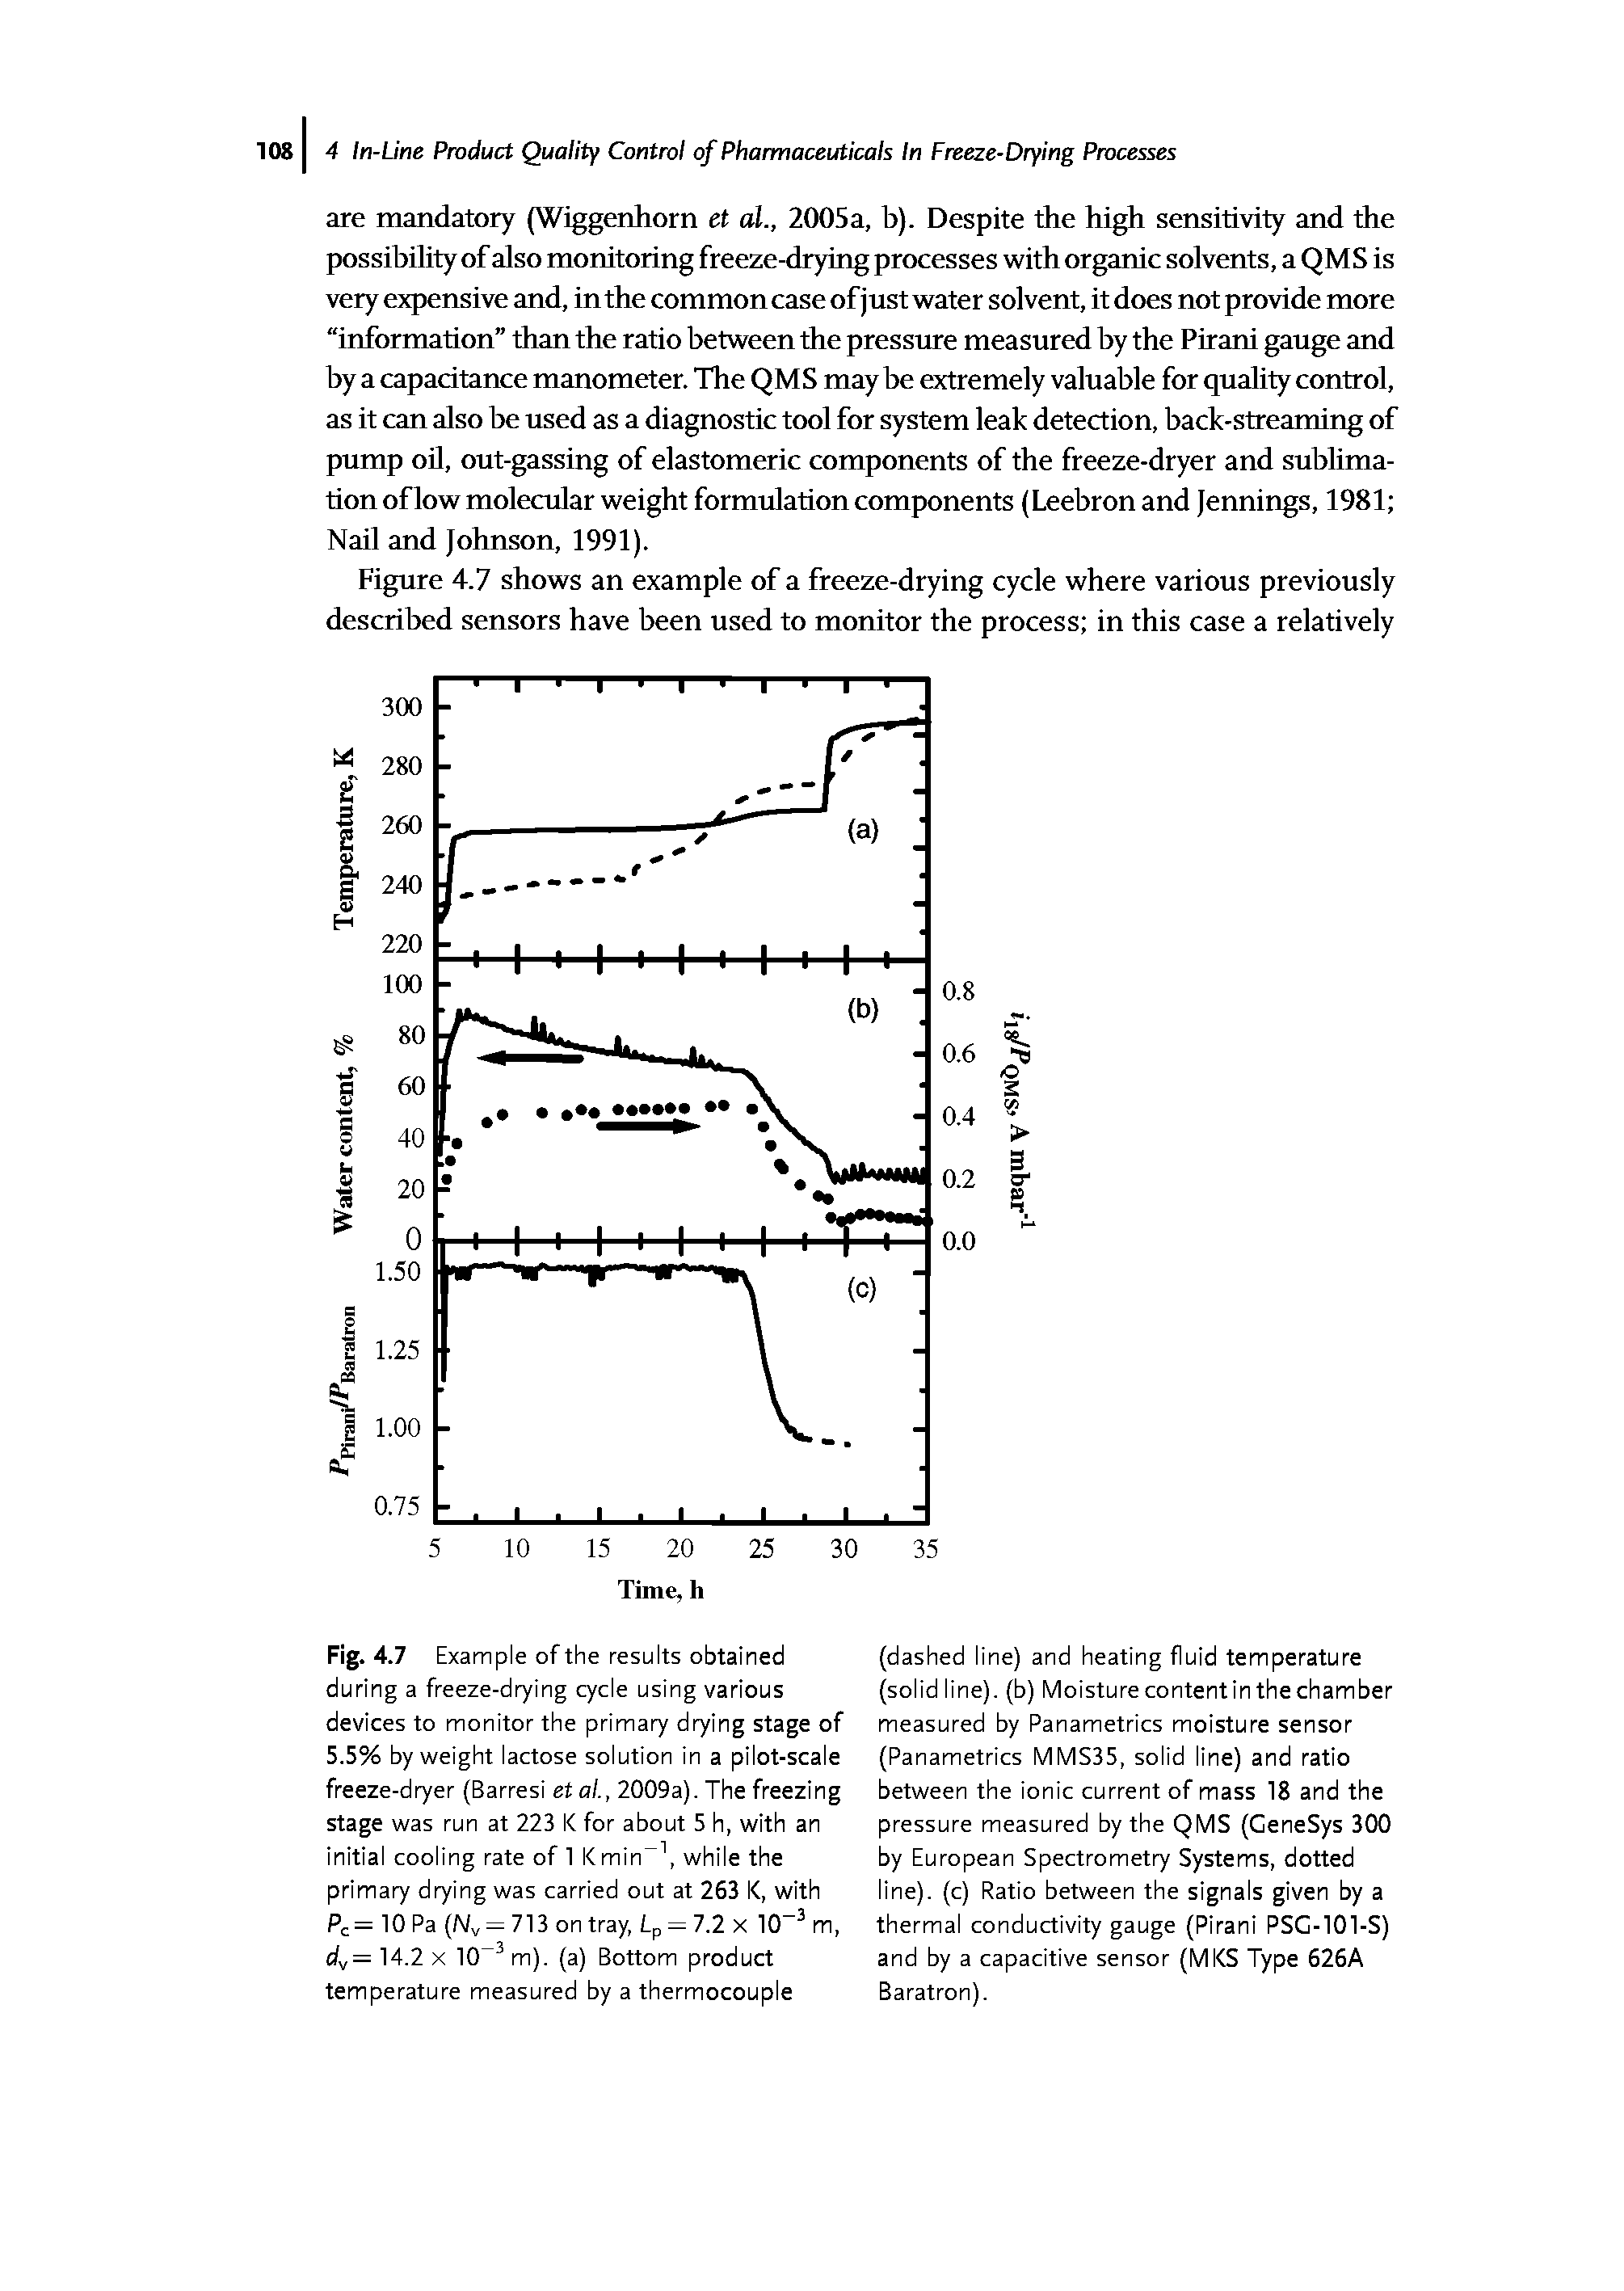 Fig. 4.7 Example of the results obtained during a freeze-drying cycle using various devices to monitor the primary drying stage of 5.5% by weight lactose solution in a pilot-scale freeze-dryer (Barresi et al., 2009a). The freezing stage was run at 223 K for about 5 h, with an initial cooling rate of 1 Kmin while the primary drying was carried out at 263 K, with Pc= 10 Pa (Nv = 713 on tray, Lp = 7.2 X 10 m, dv= 14.2 X 10 m). (a) Bottom product temperature measured by a thermocouple...